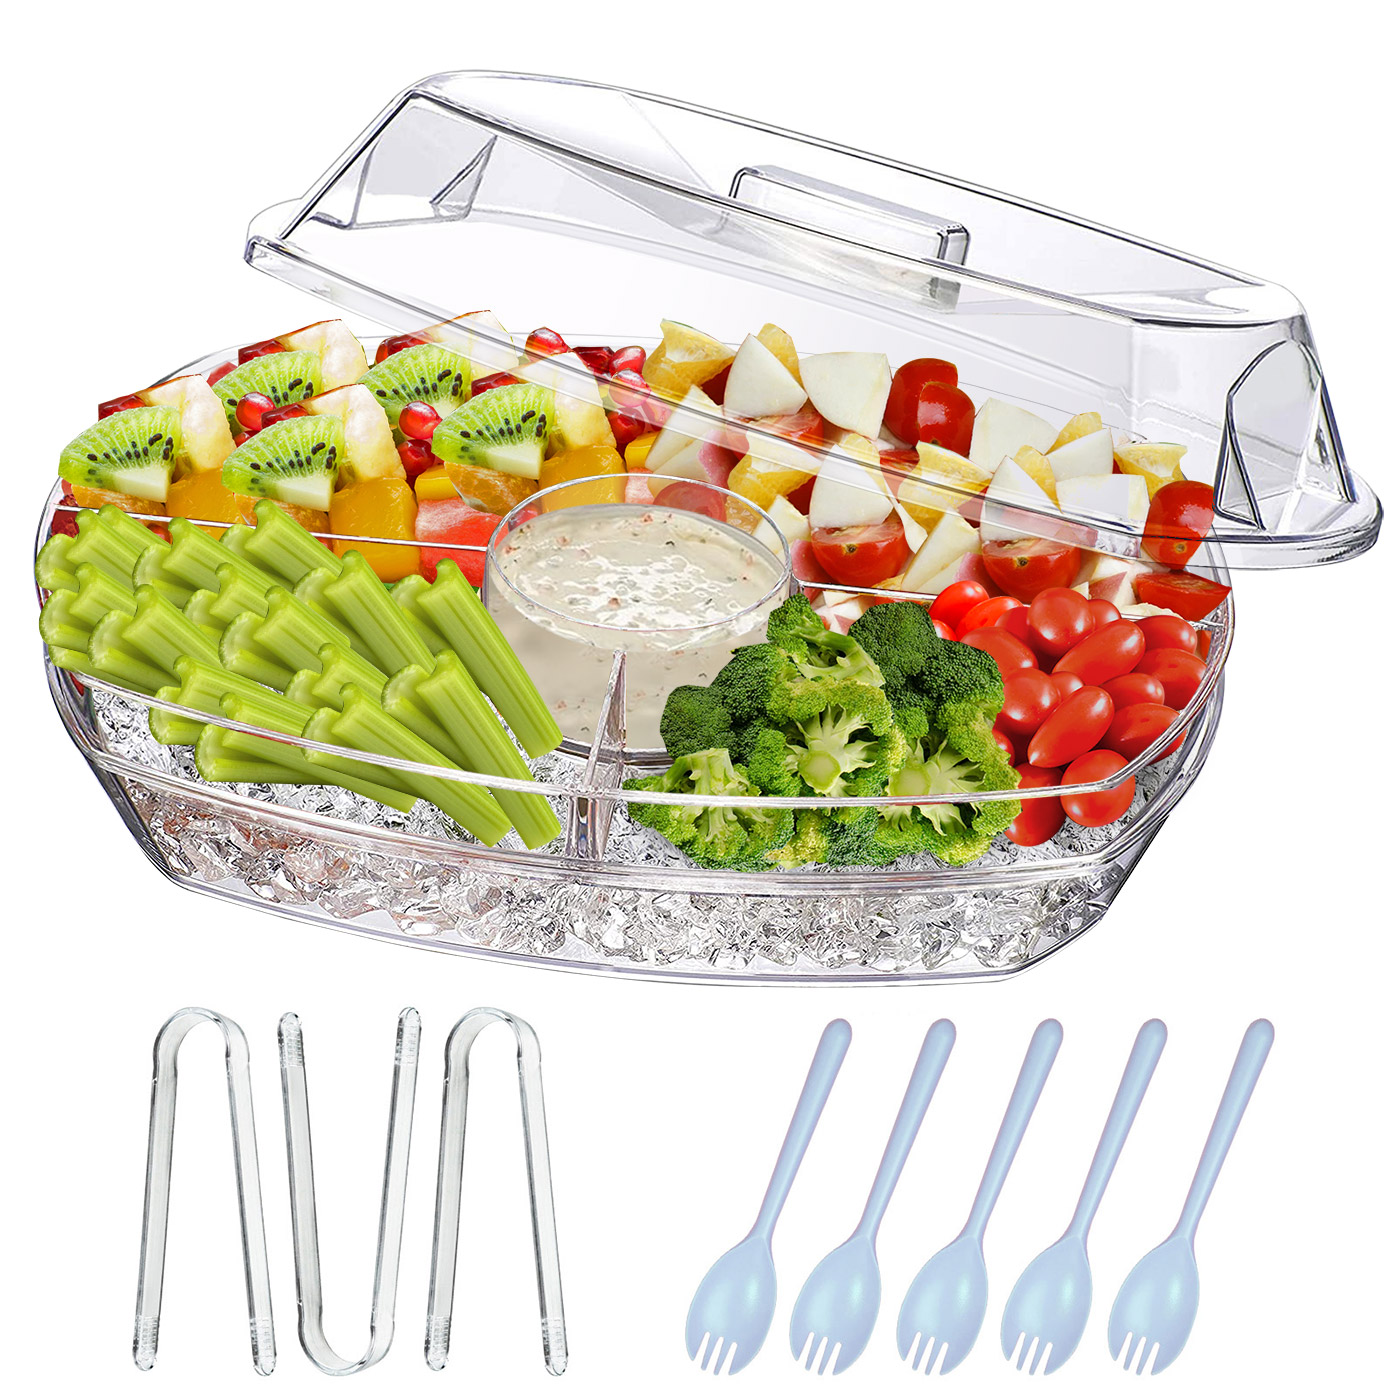 INNOVATIVE LIFE Appetizer Serving Trays on Ice with Lid, Chilled Serving Platters for Food, Veggie, Clear - image 1 of 8